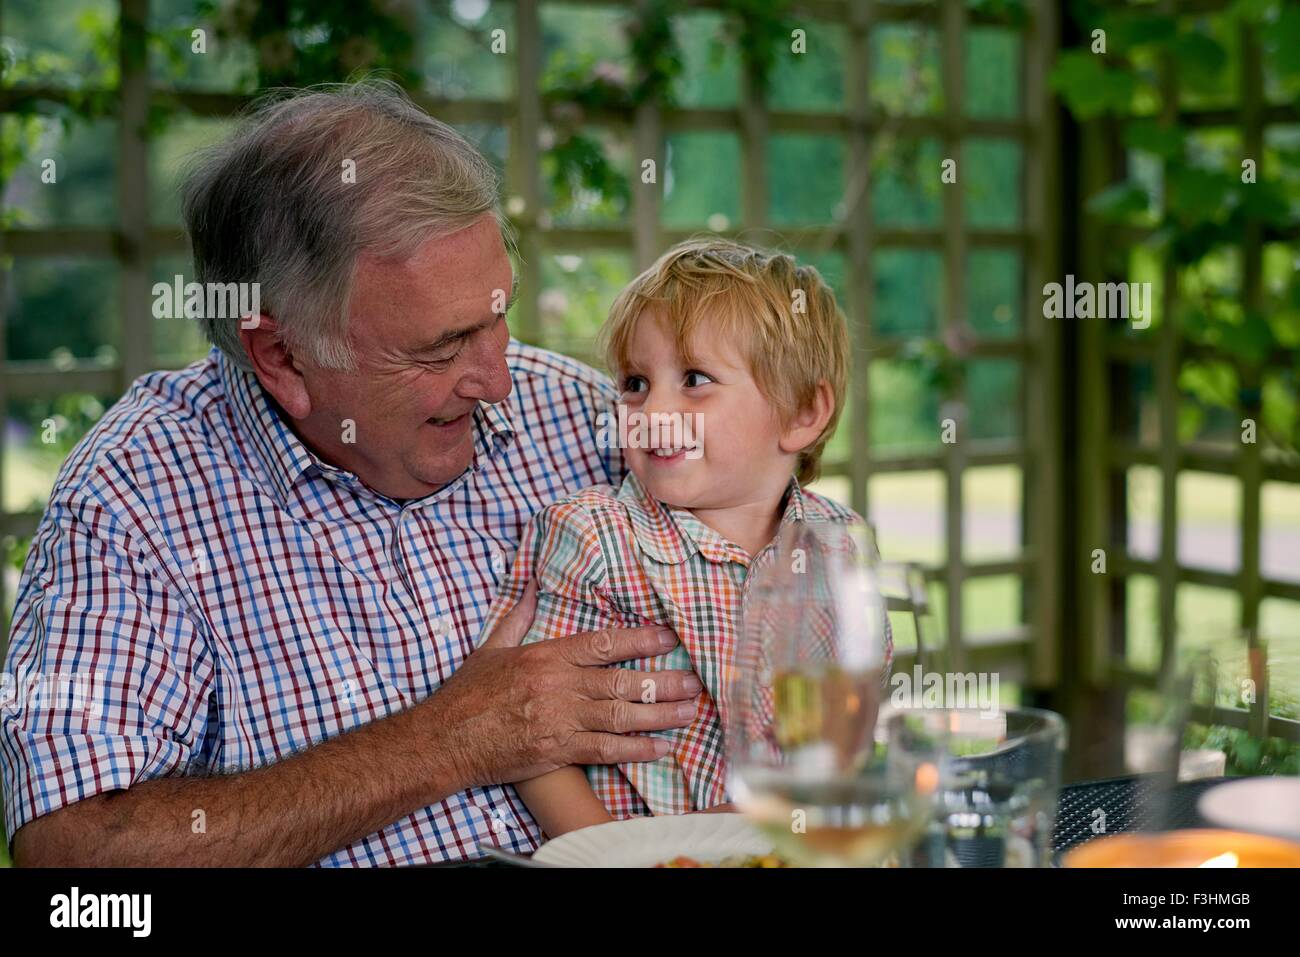 Grandson sitting on grandfathers lap, face to face smiling Stock Photo